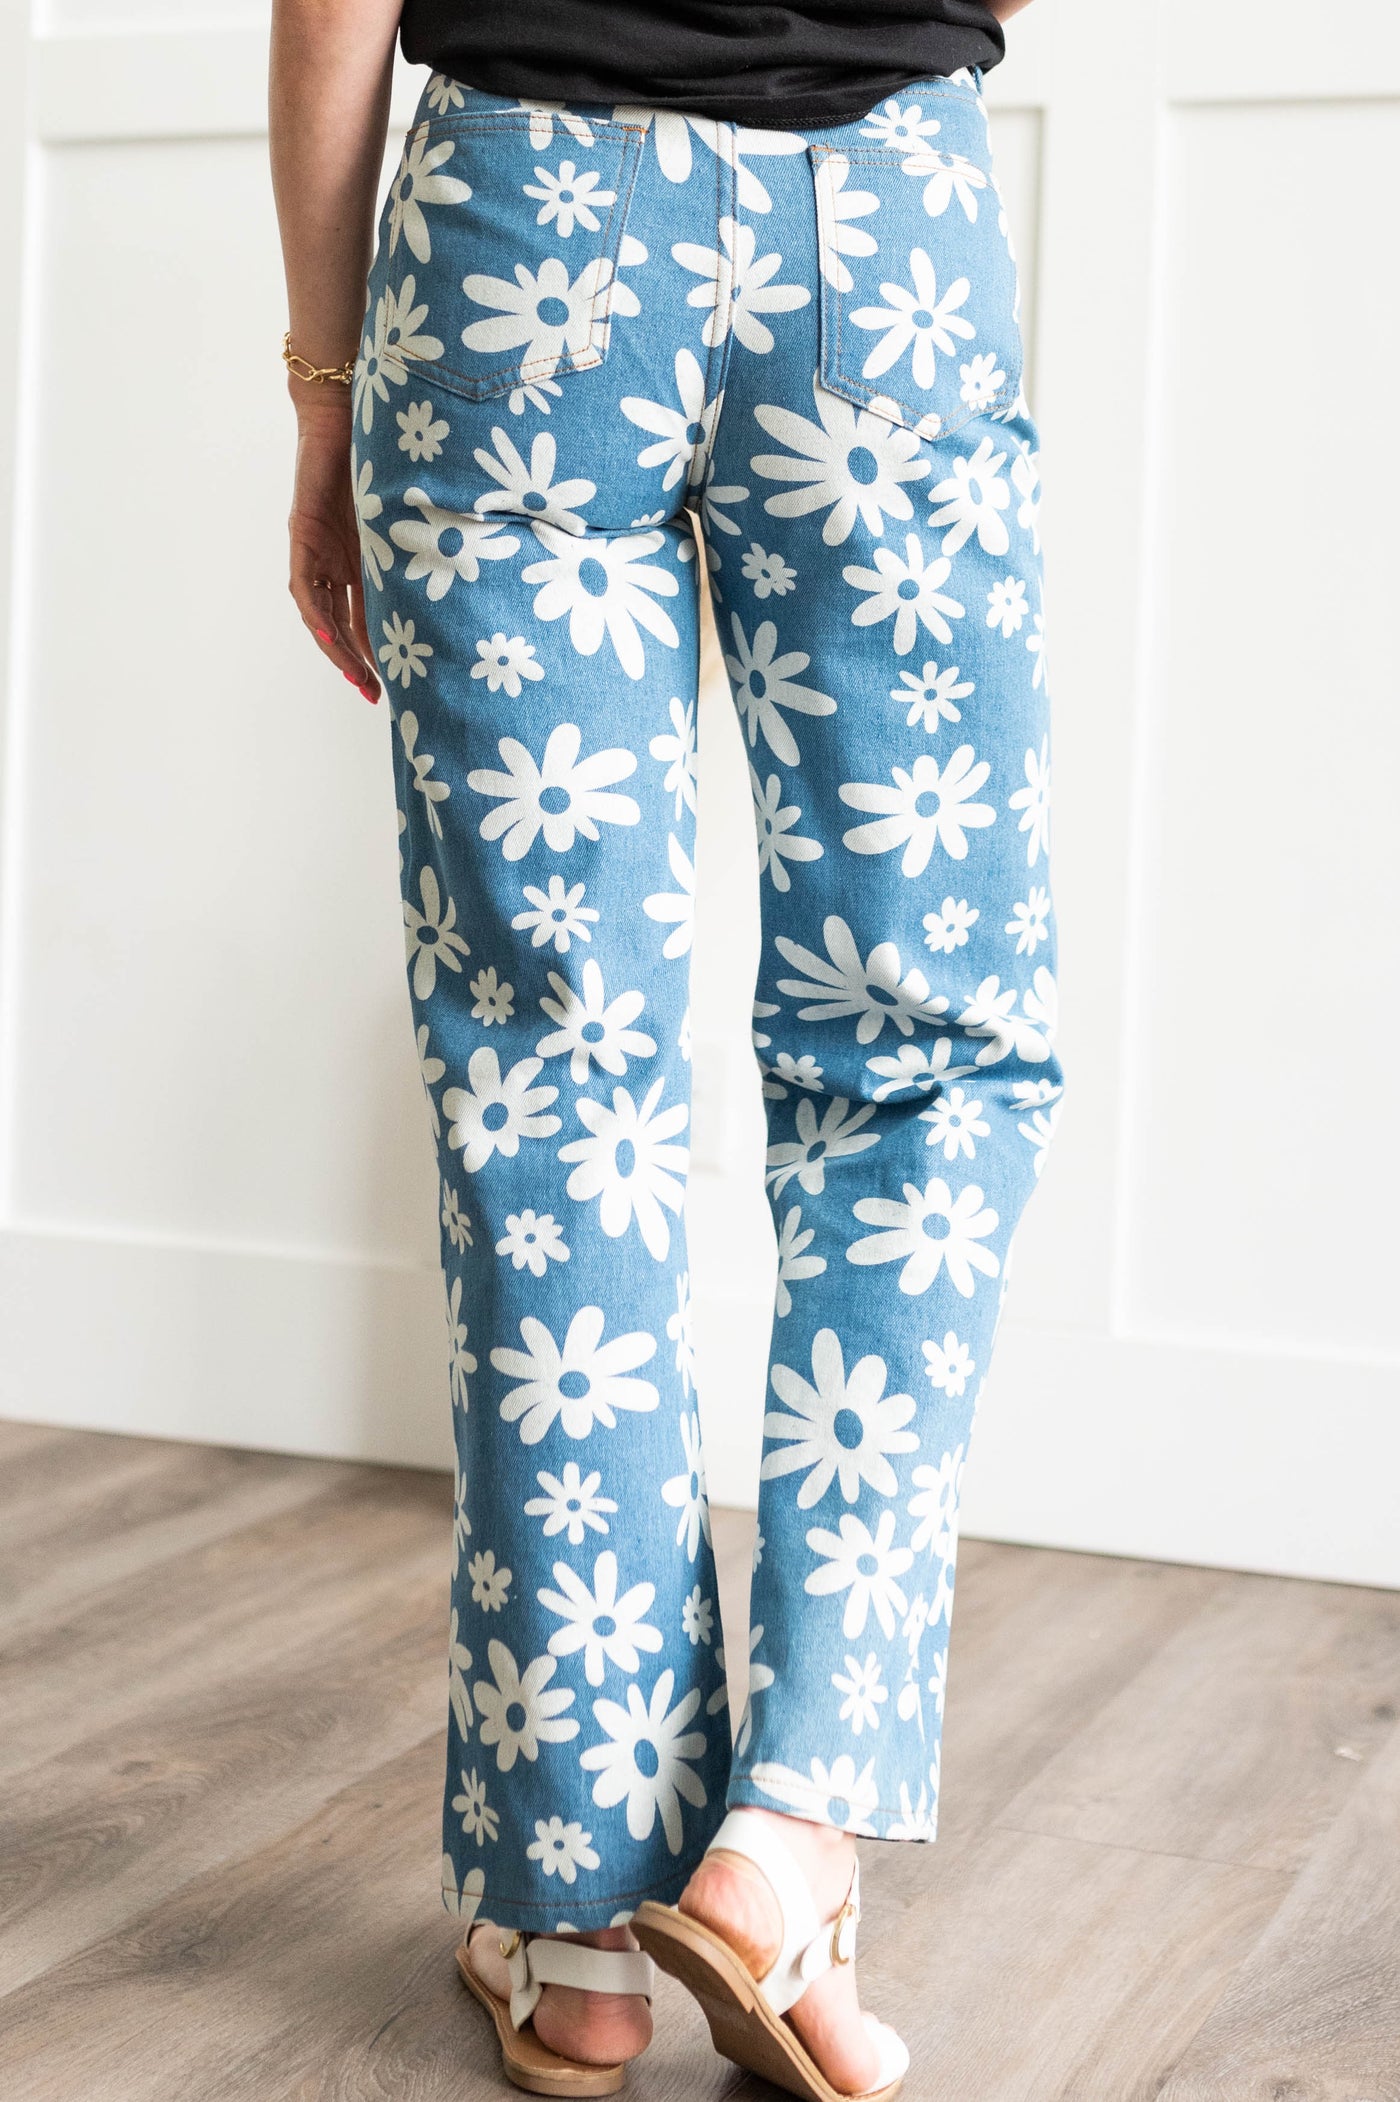 Back view of floral jeans